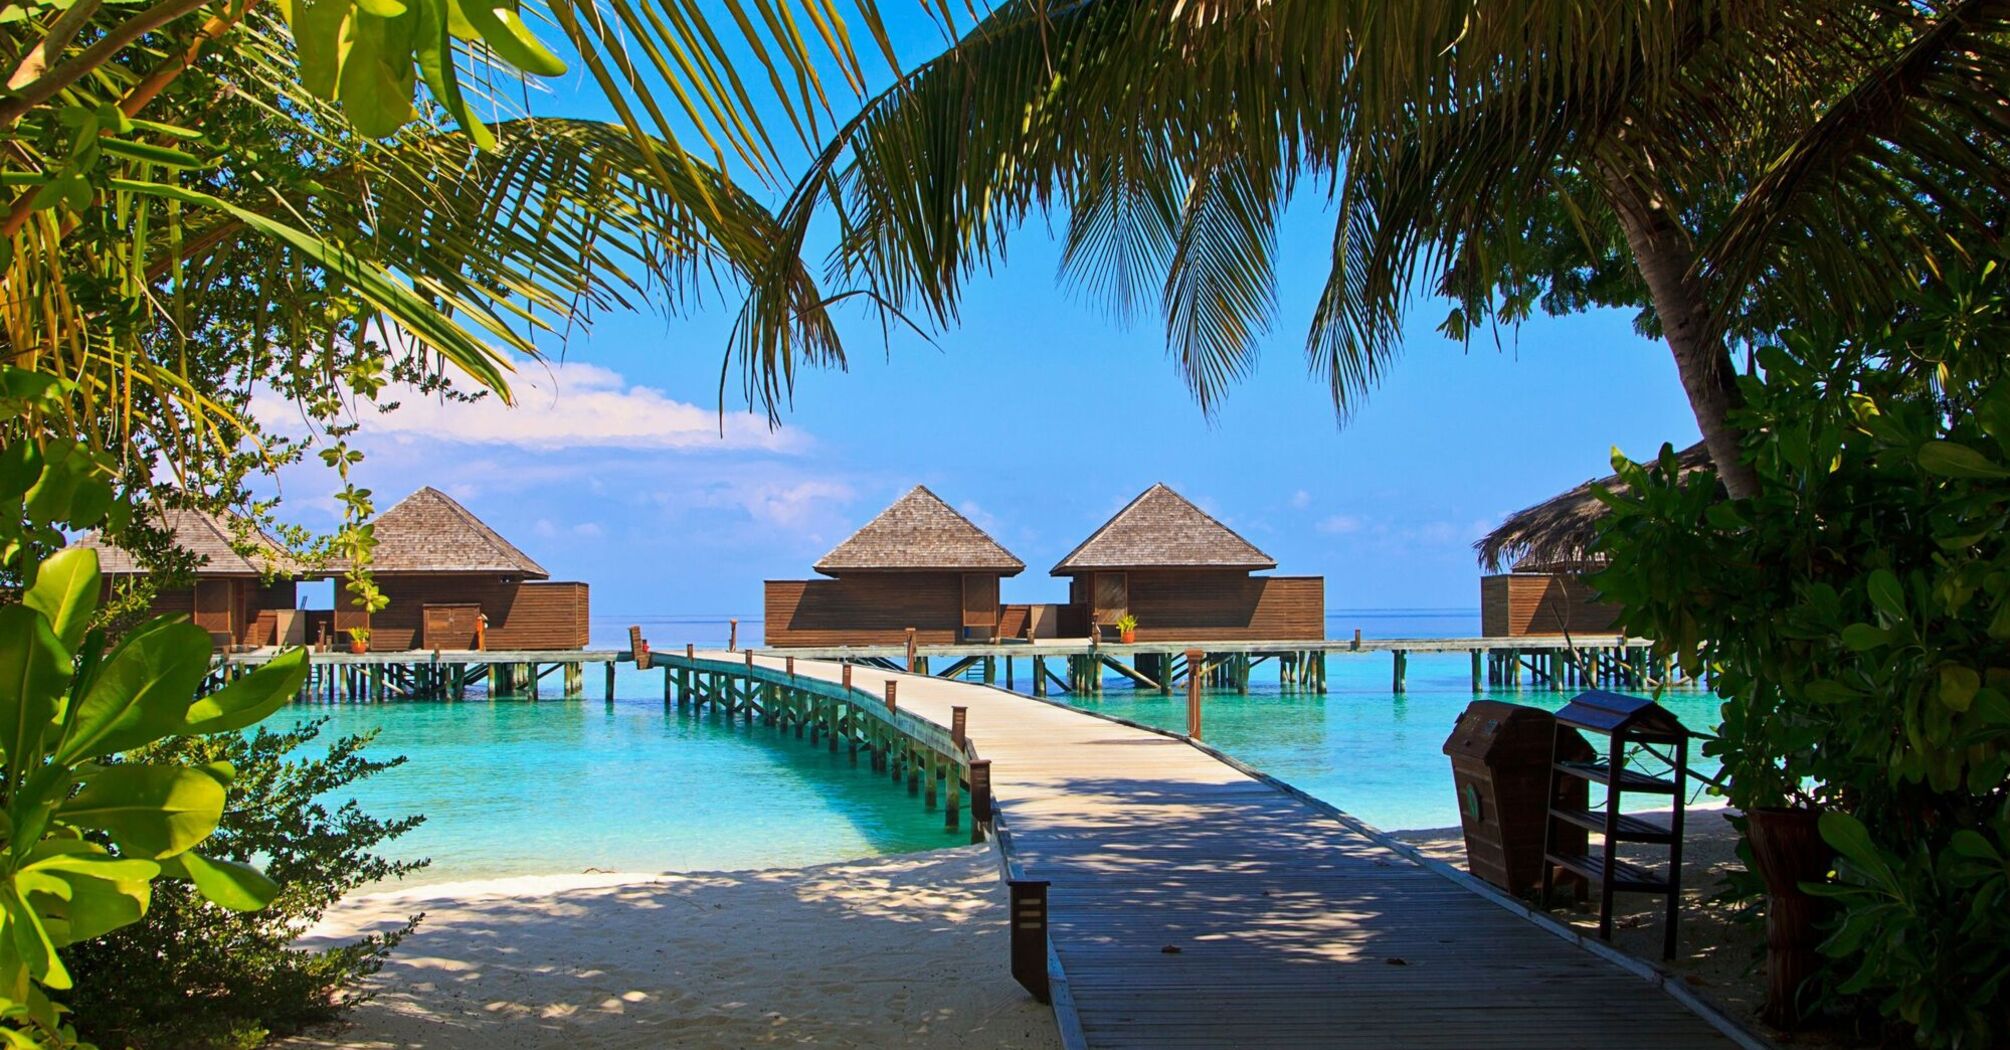 Beach villas in the Maldives with a wooden walkway